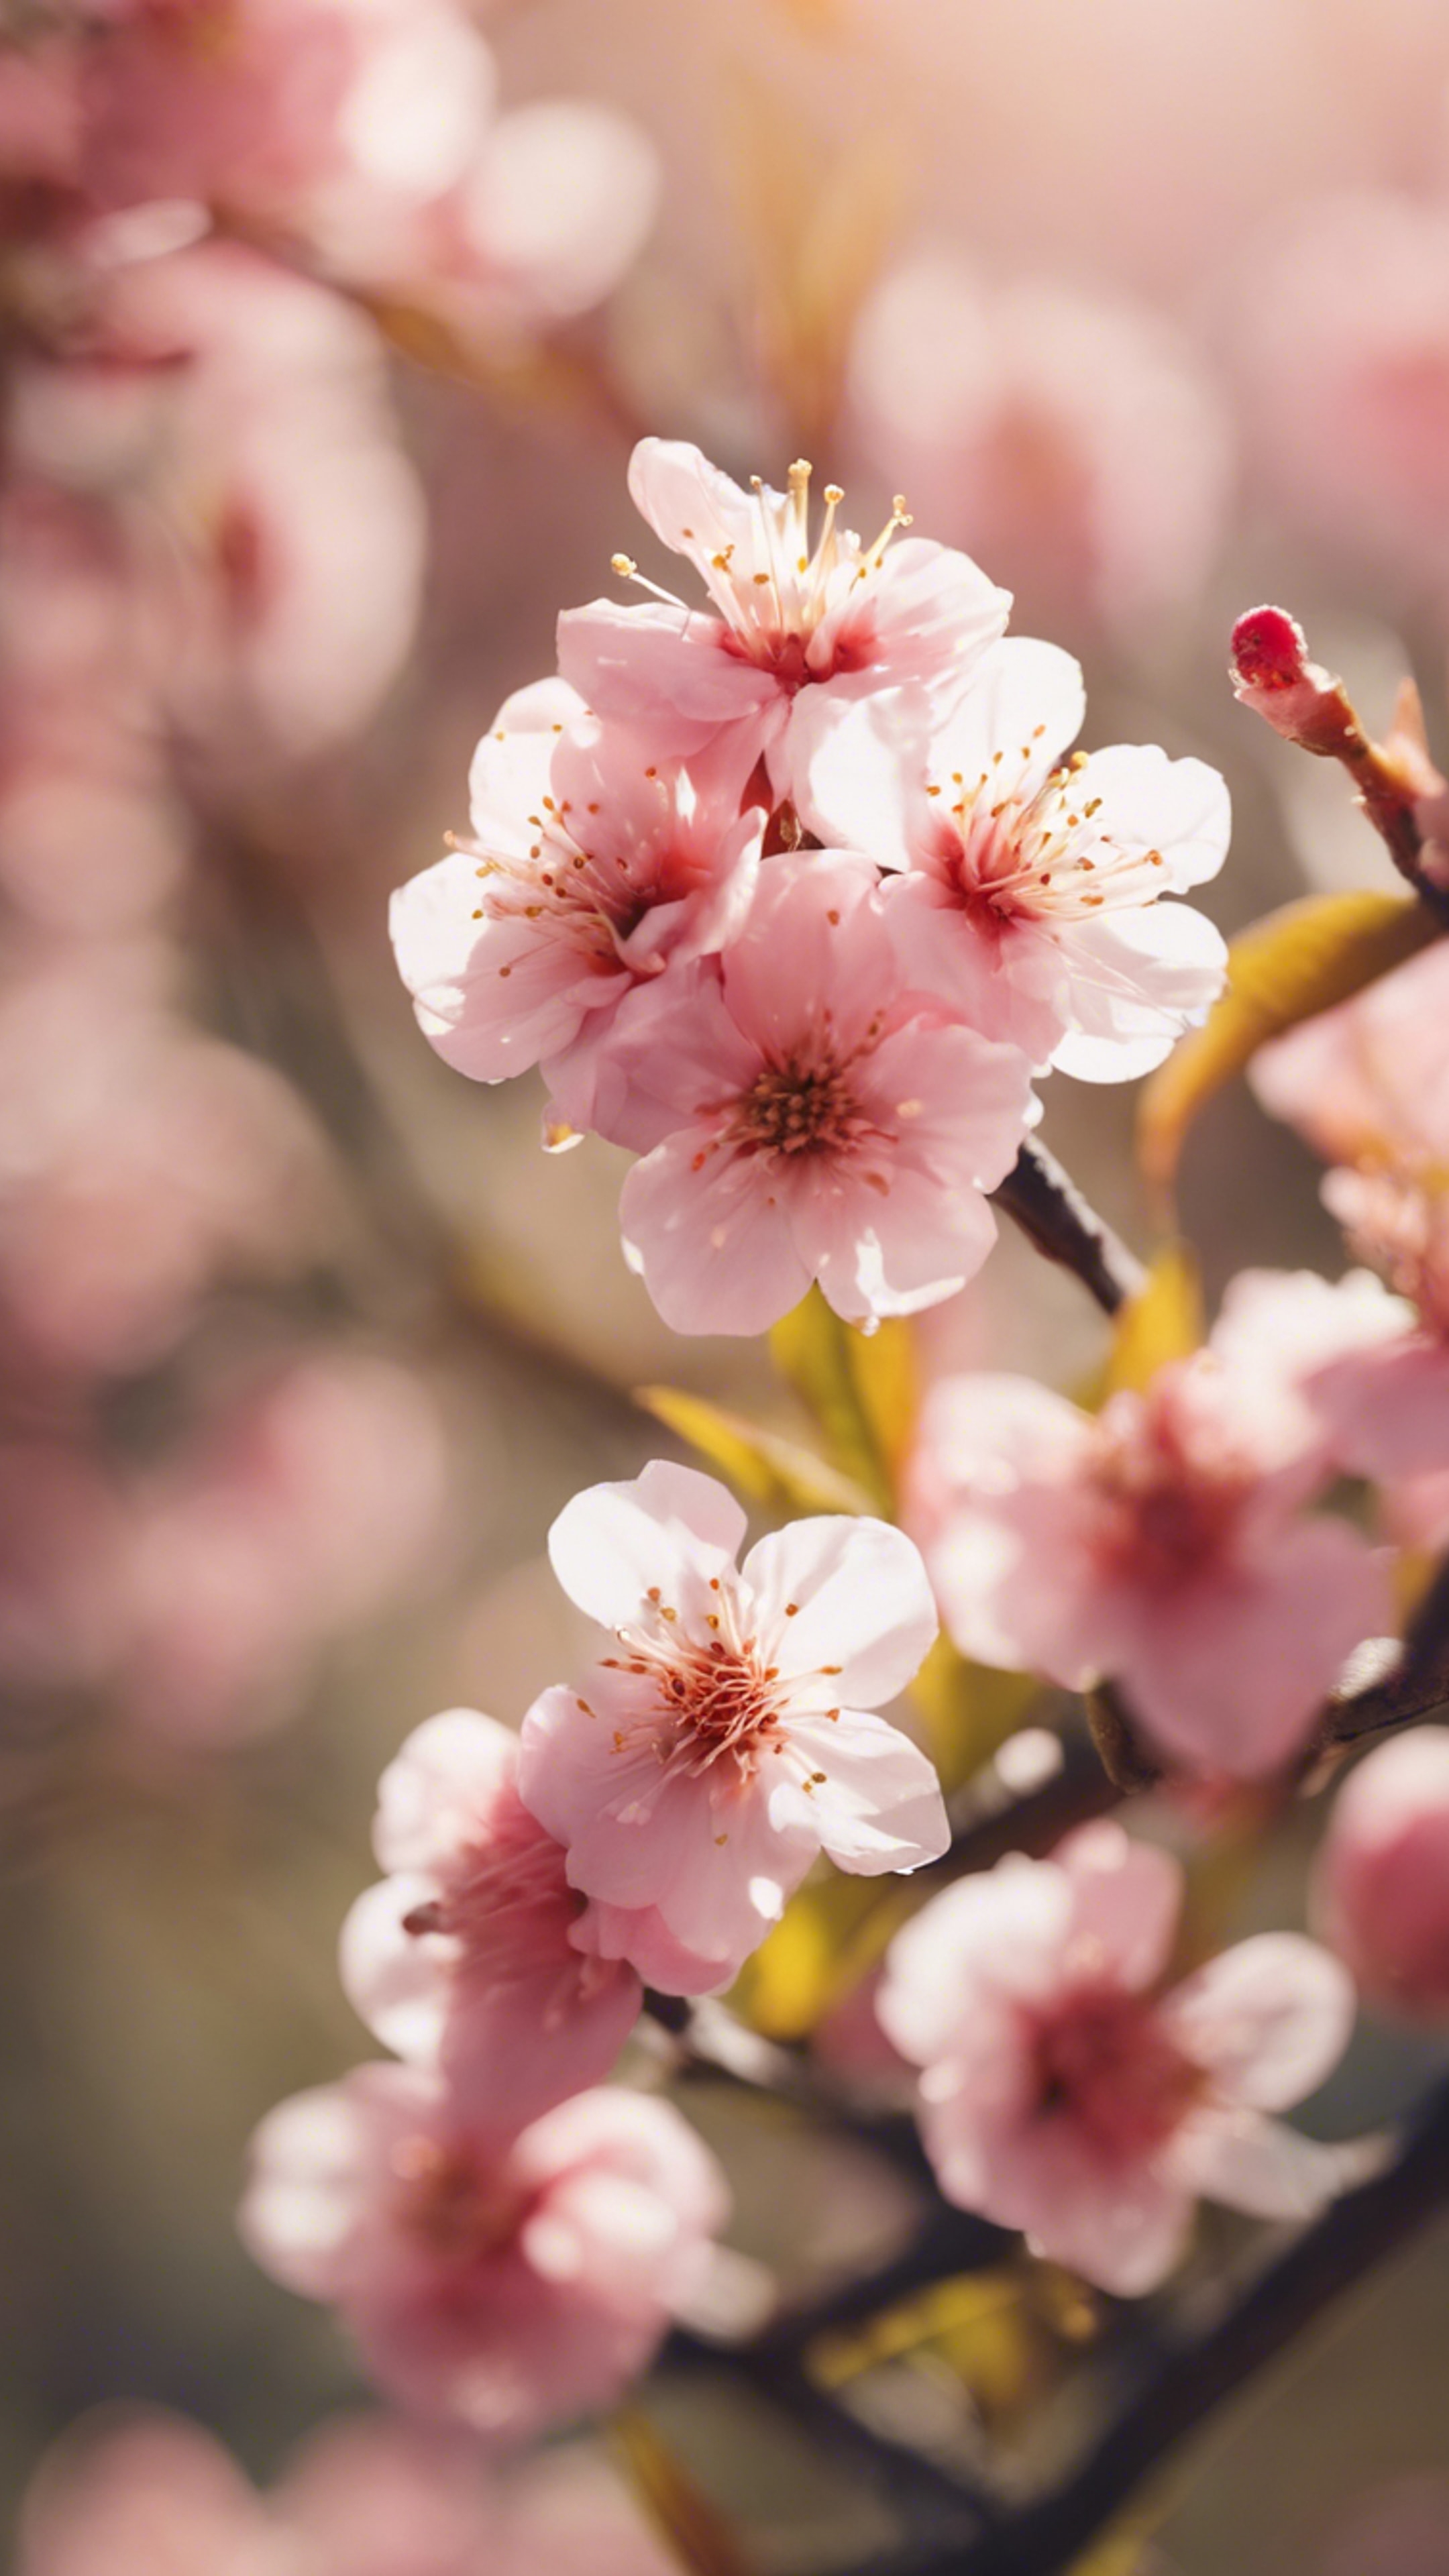 A close-up of happy peach flowers blooming cheerfully on a sunny spring day. Tapetai[9ab03d009b524efe8bfb]